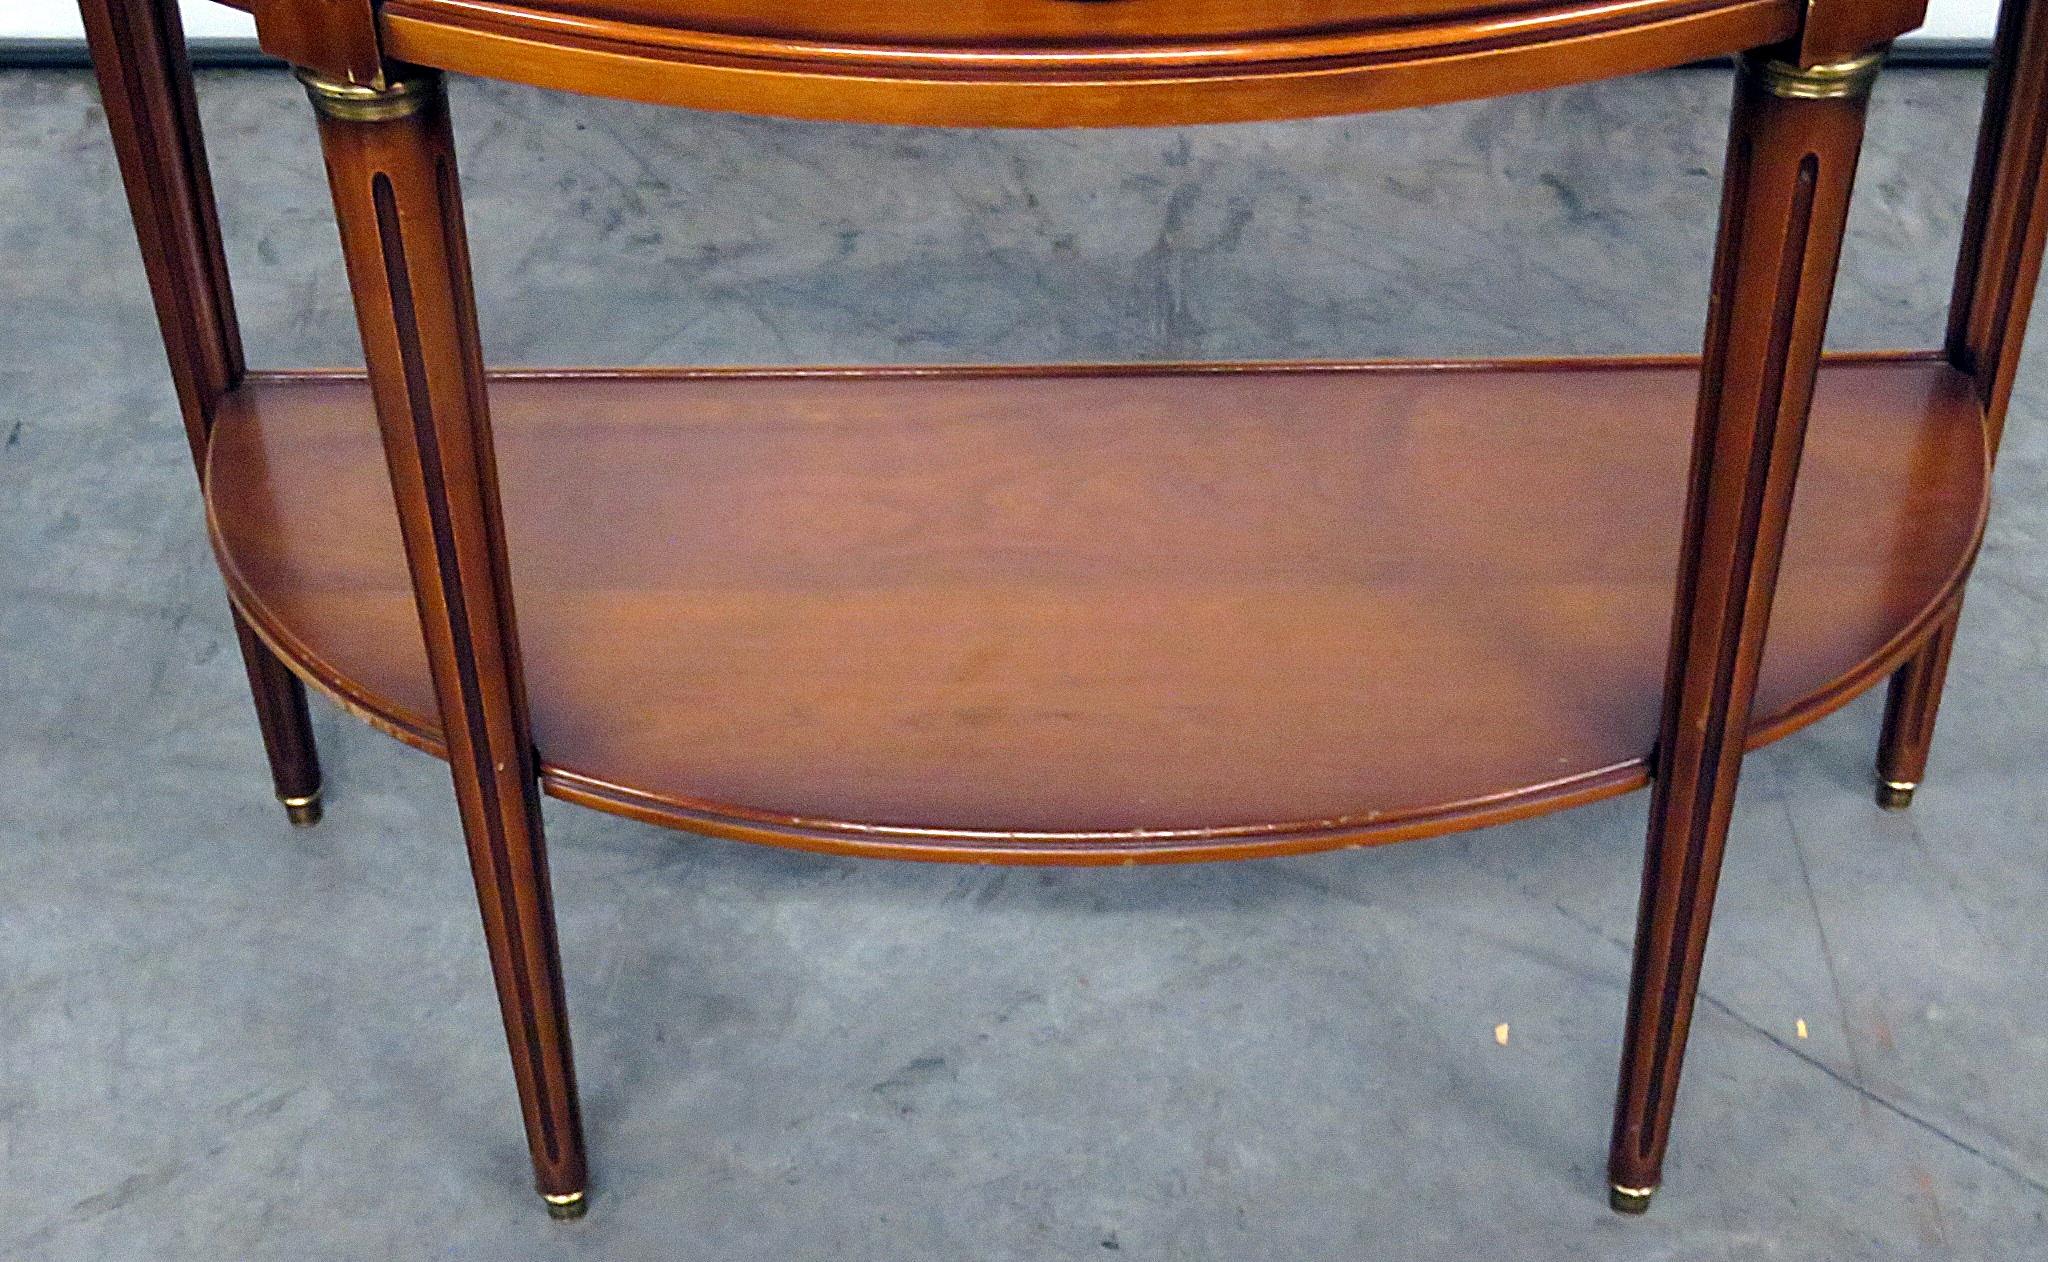 Directoire style marble-top 1 drawer demilunce console table.